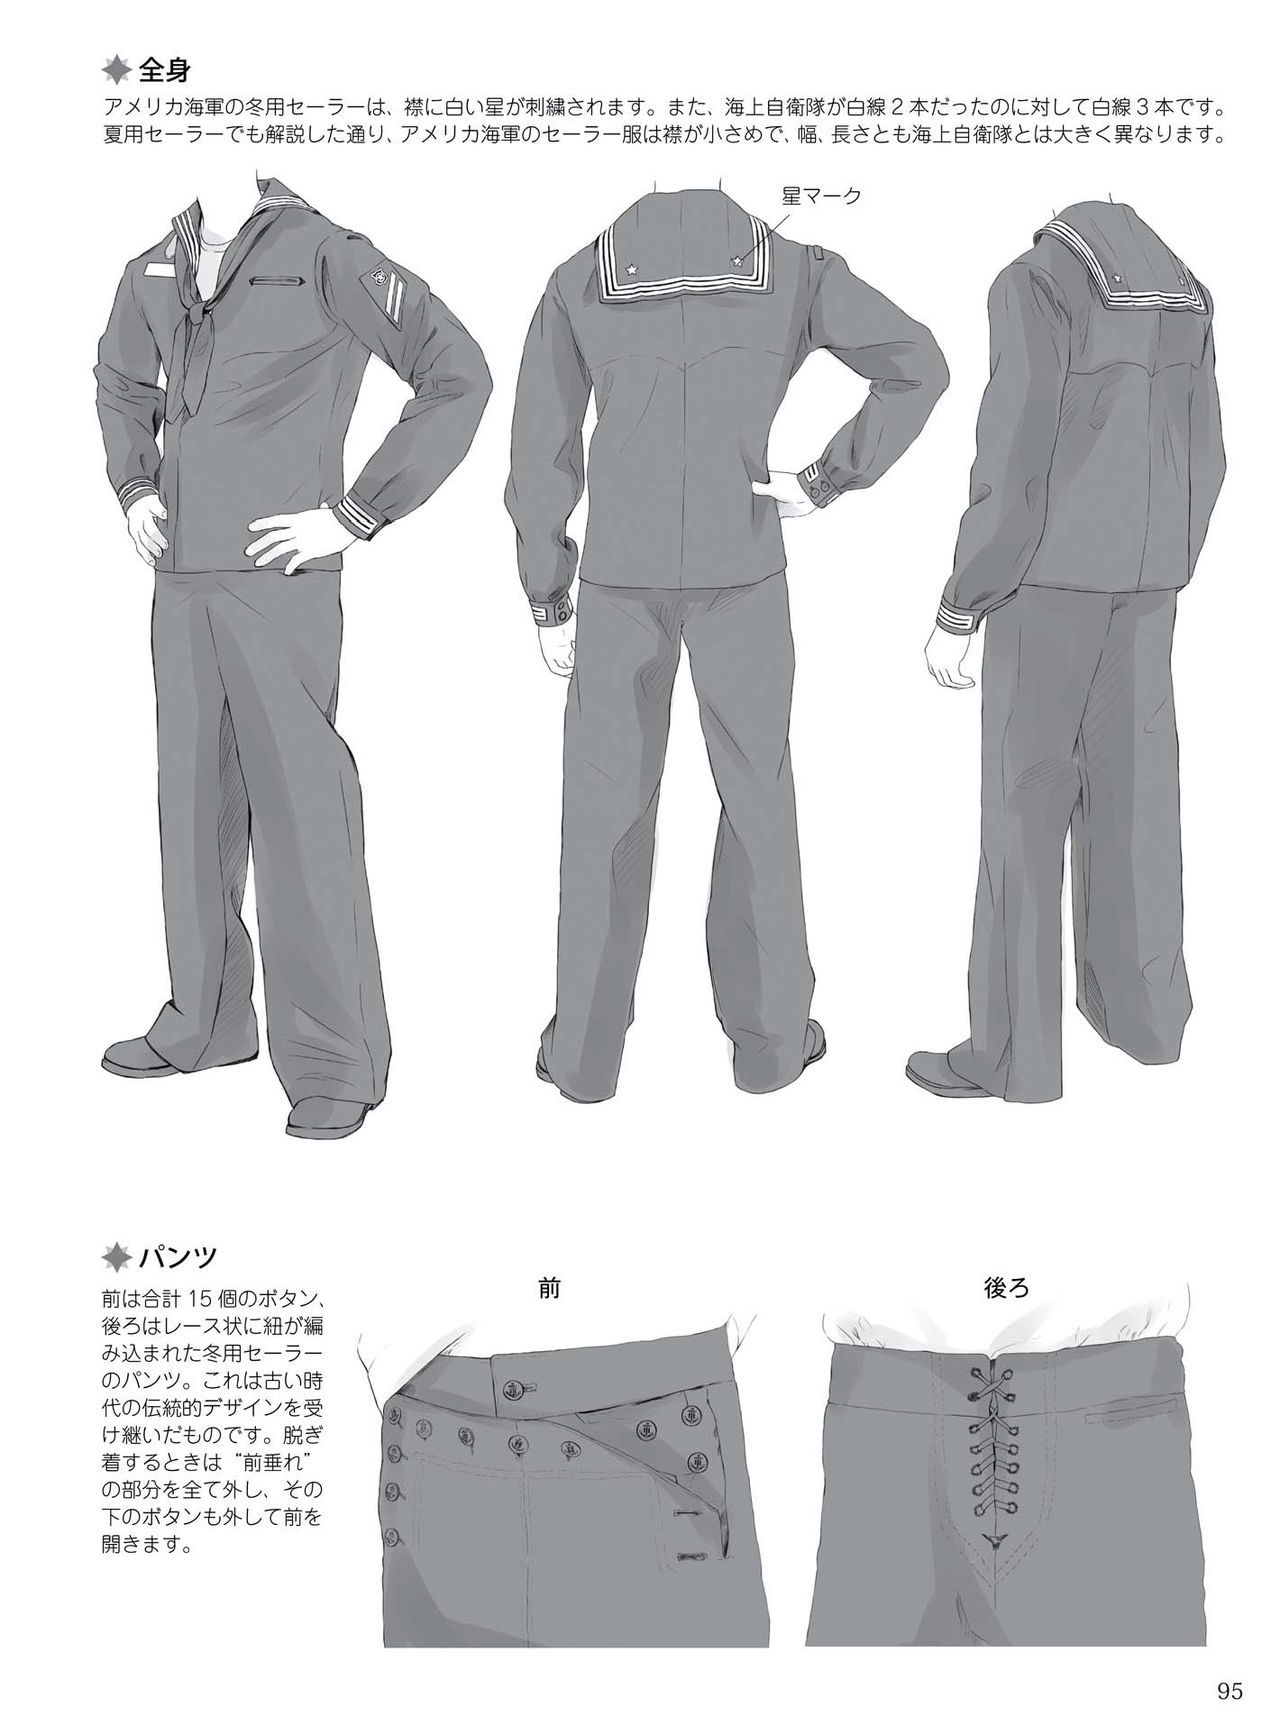 How to draw military uniforms and uniforms From Self-Defense Forces 軍服・制服の描き方 アメリカ軍・自衛隊の制服から戦闘服まで 98